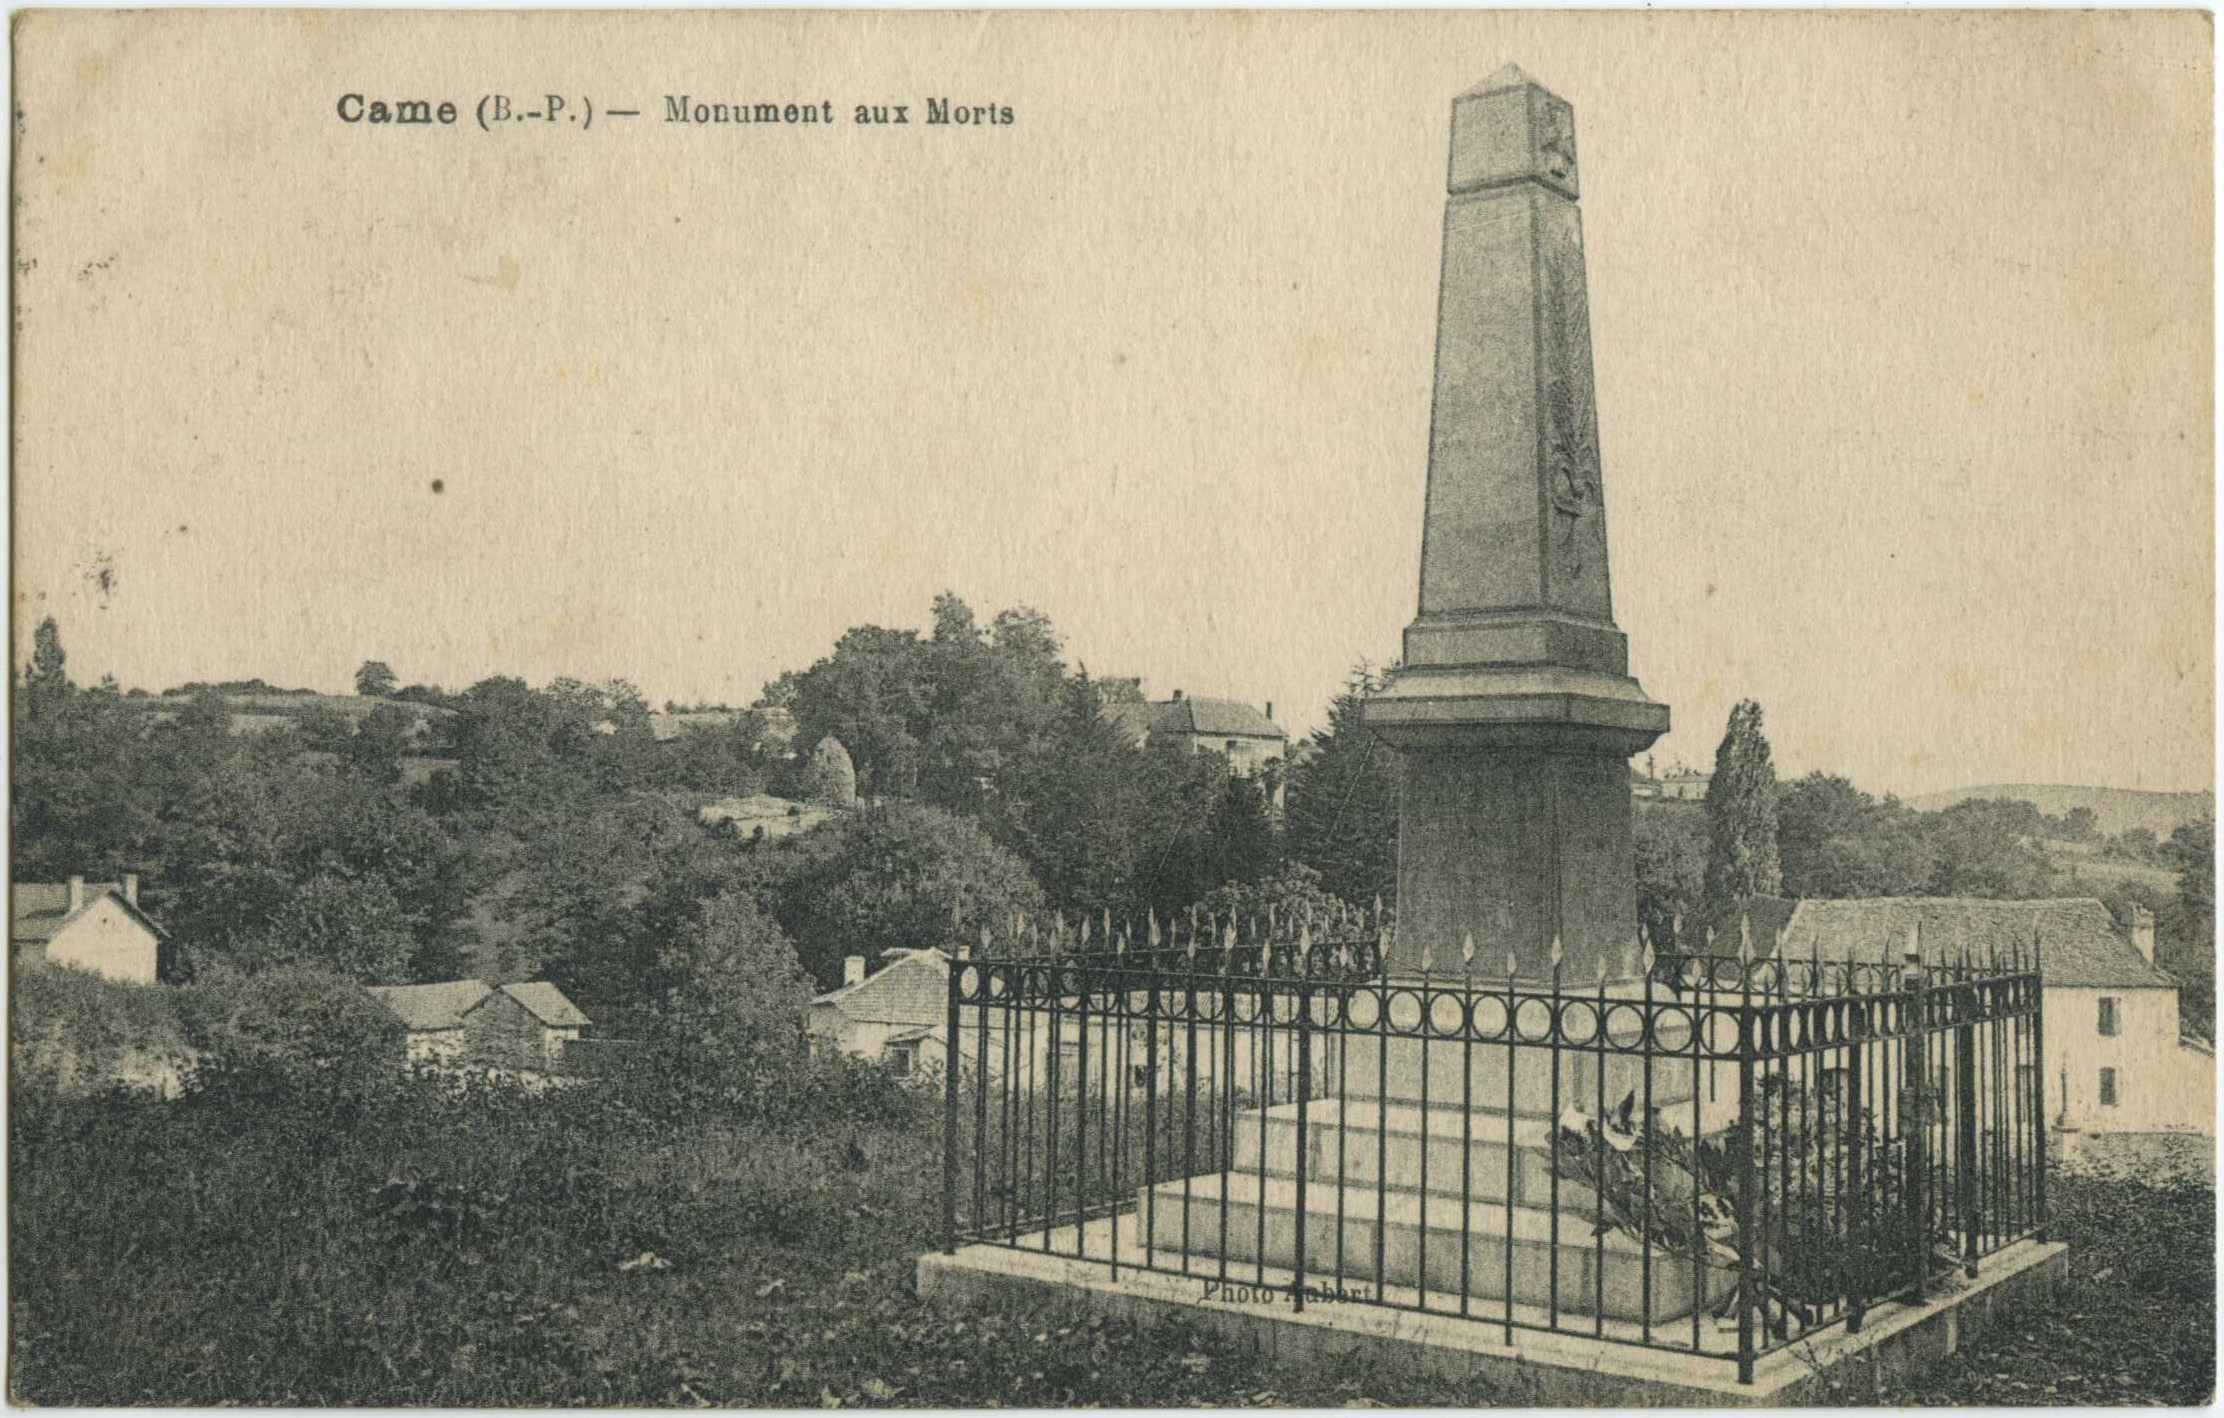 Came - Monument aux Morts